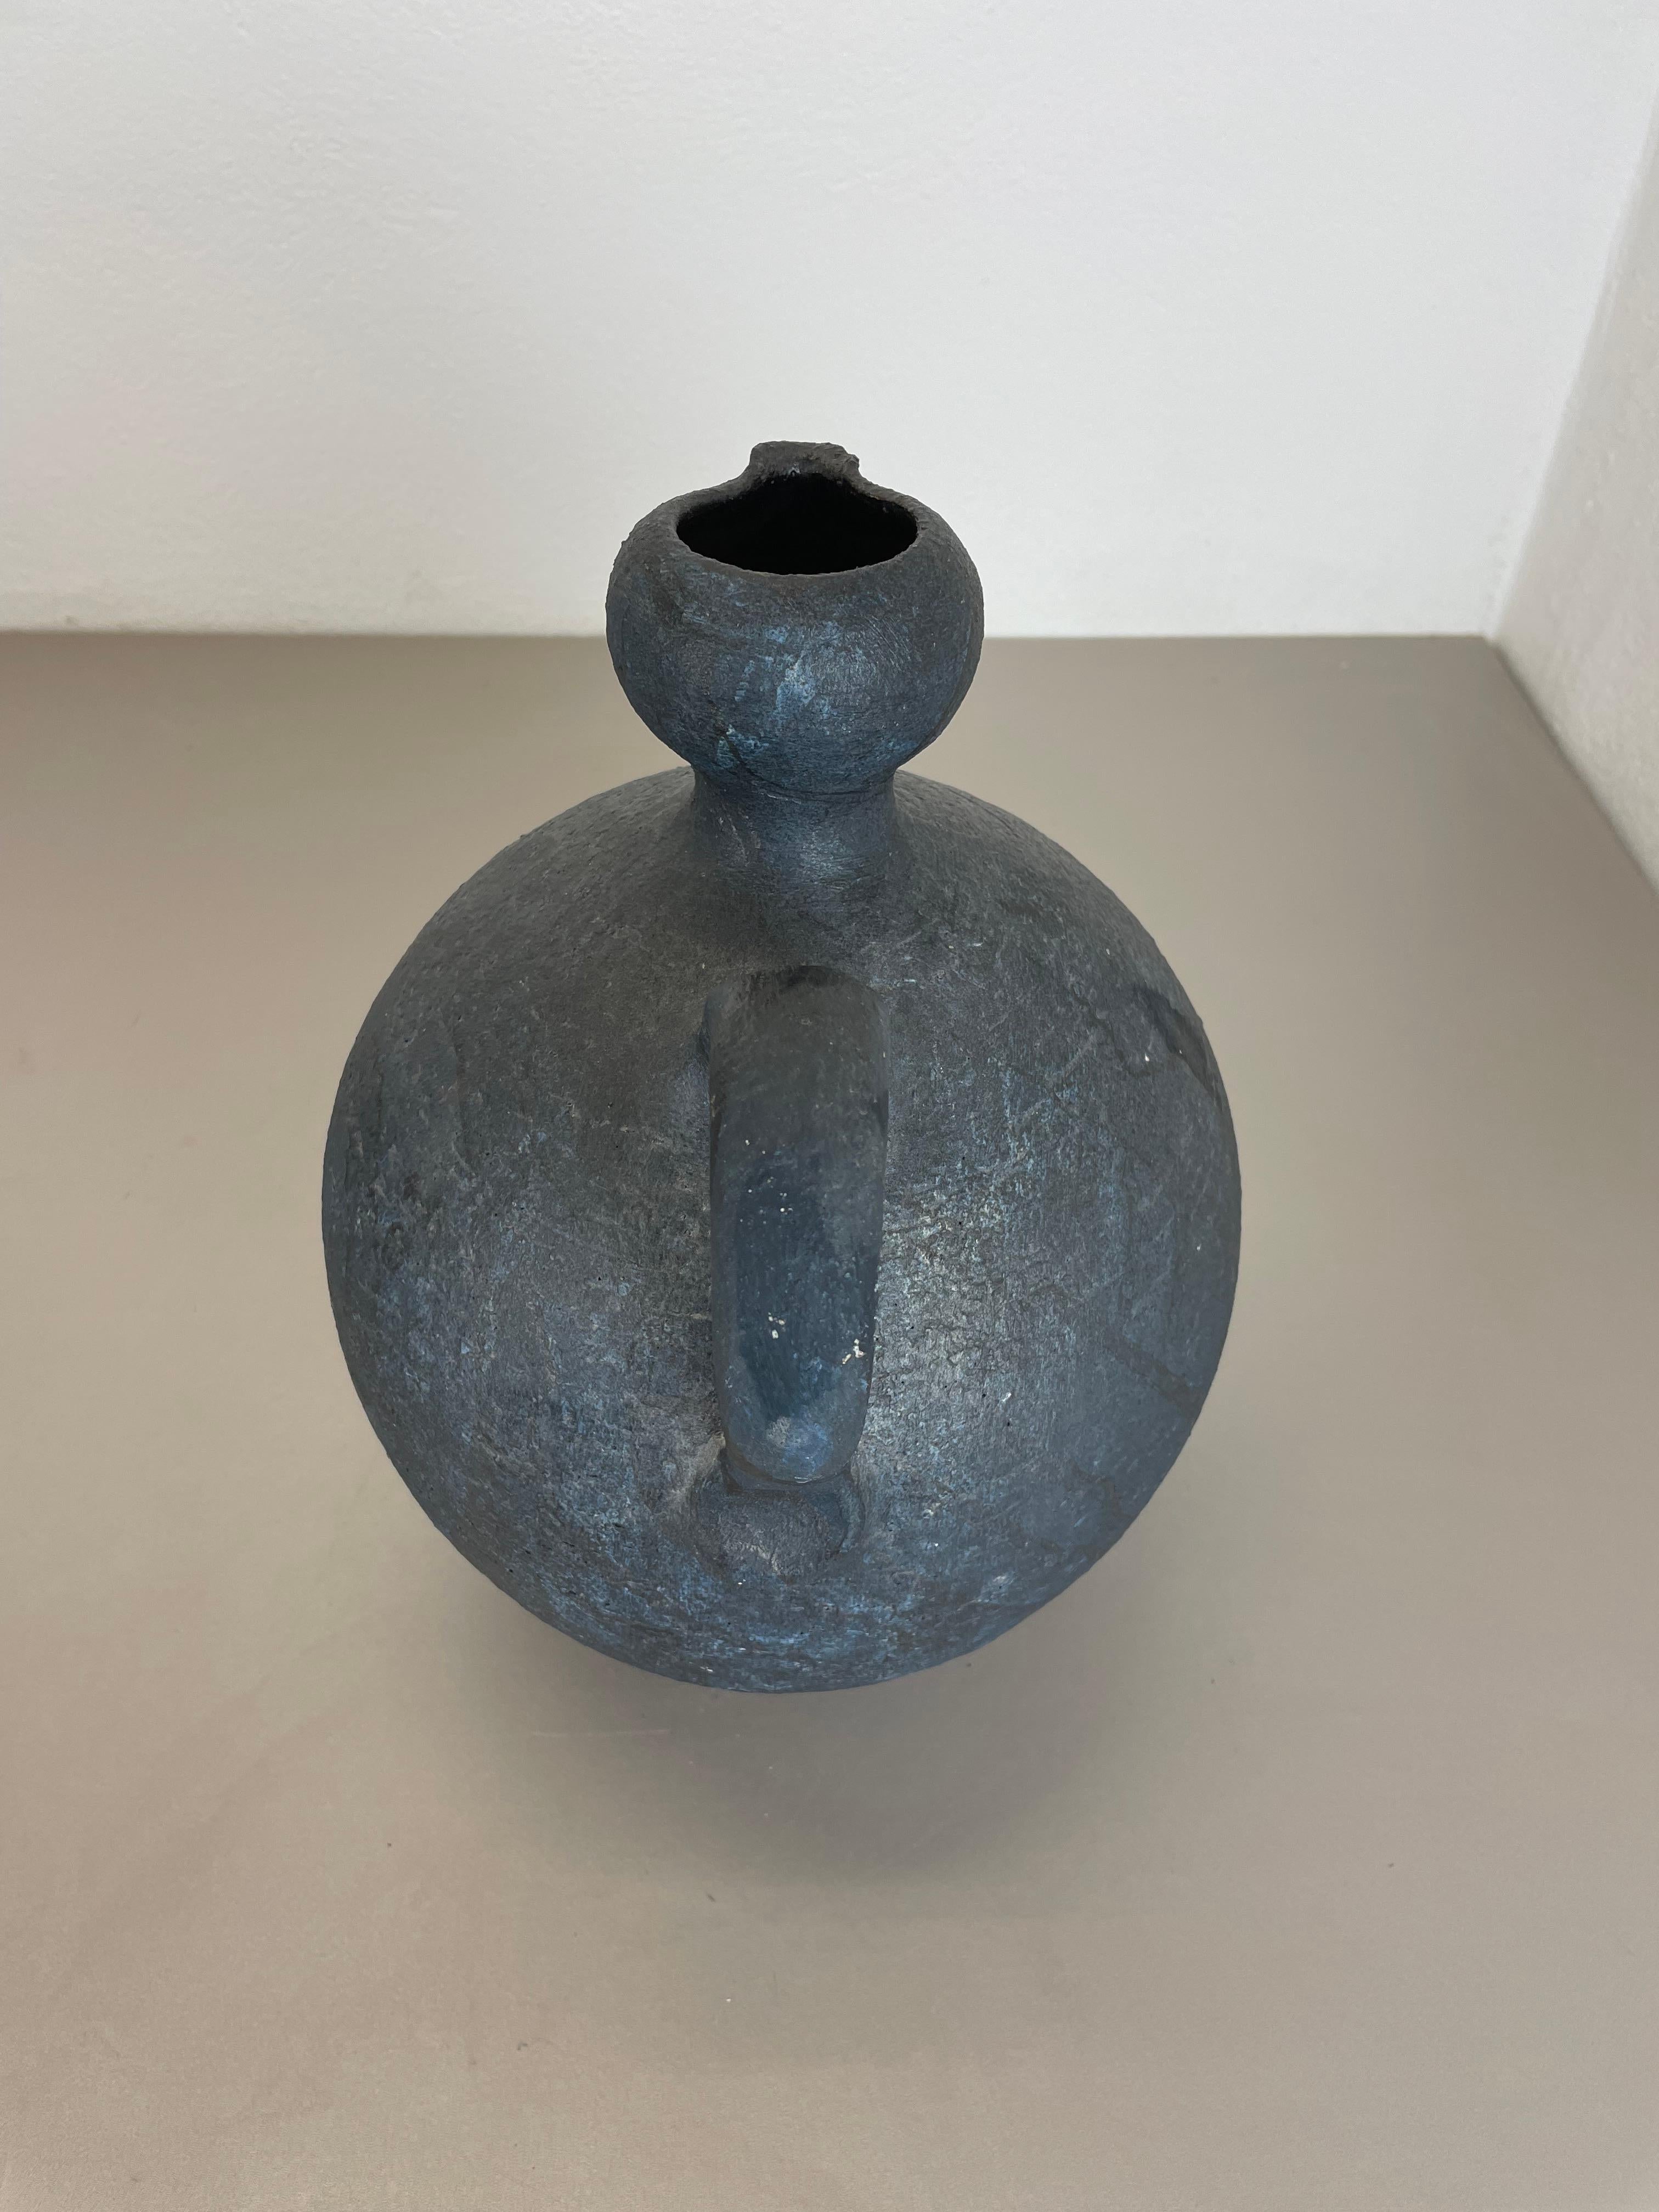 Abstract 31cm Ceramic Studio Pottery Object, Gerhard Liebenthron, Germany, 1981 In Good Condition For Sale In Kirchlengern, DE